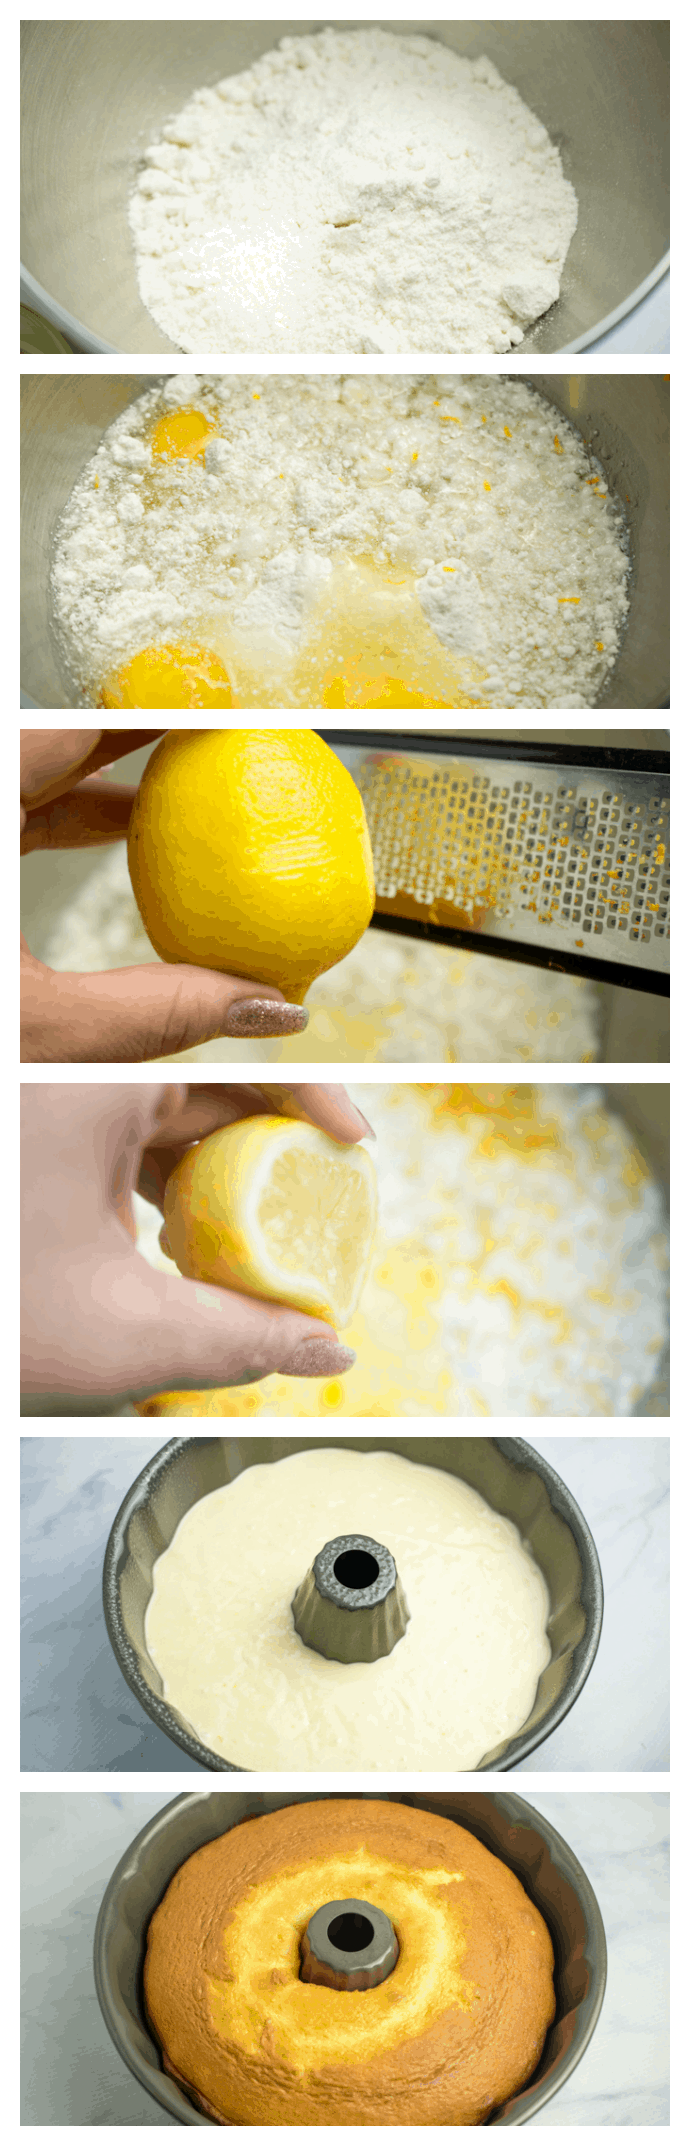 long collage image showing the steps to baking a Bundt cake; dry mix, wet ingredients, lemon zest and juice, batter in cake pan, baked cake